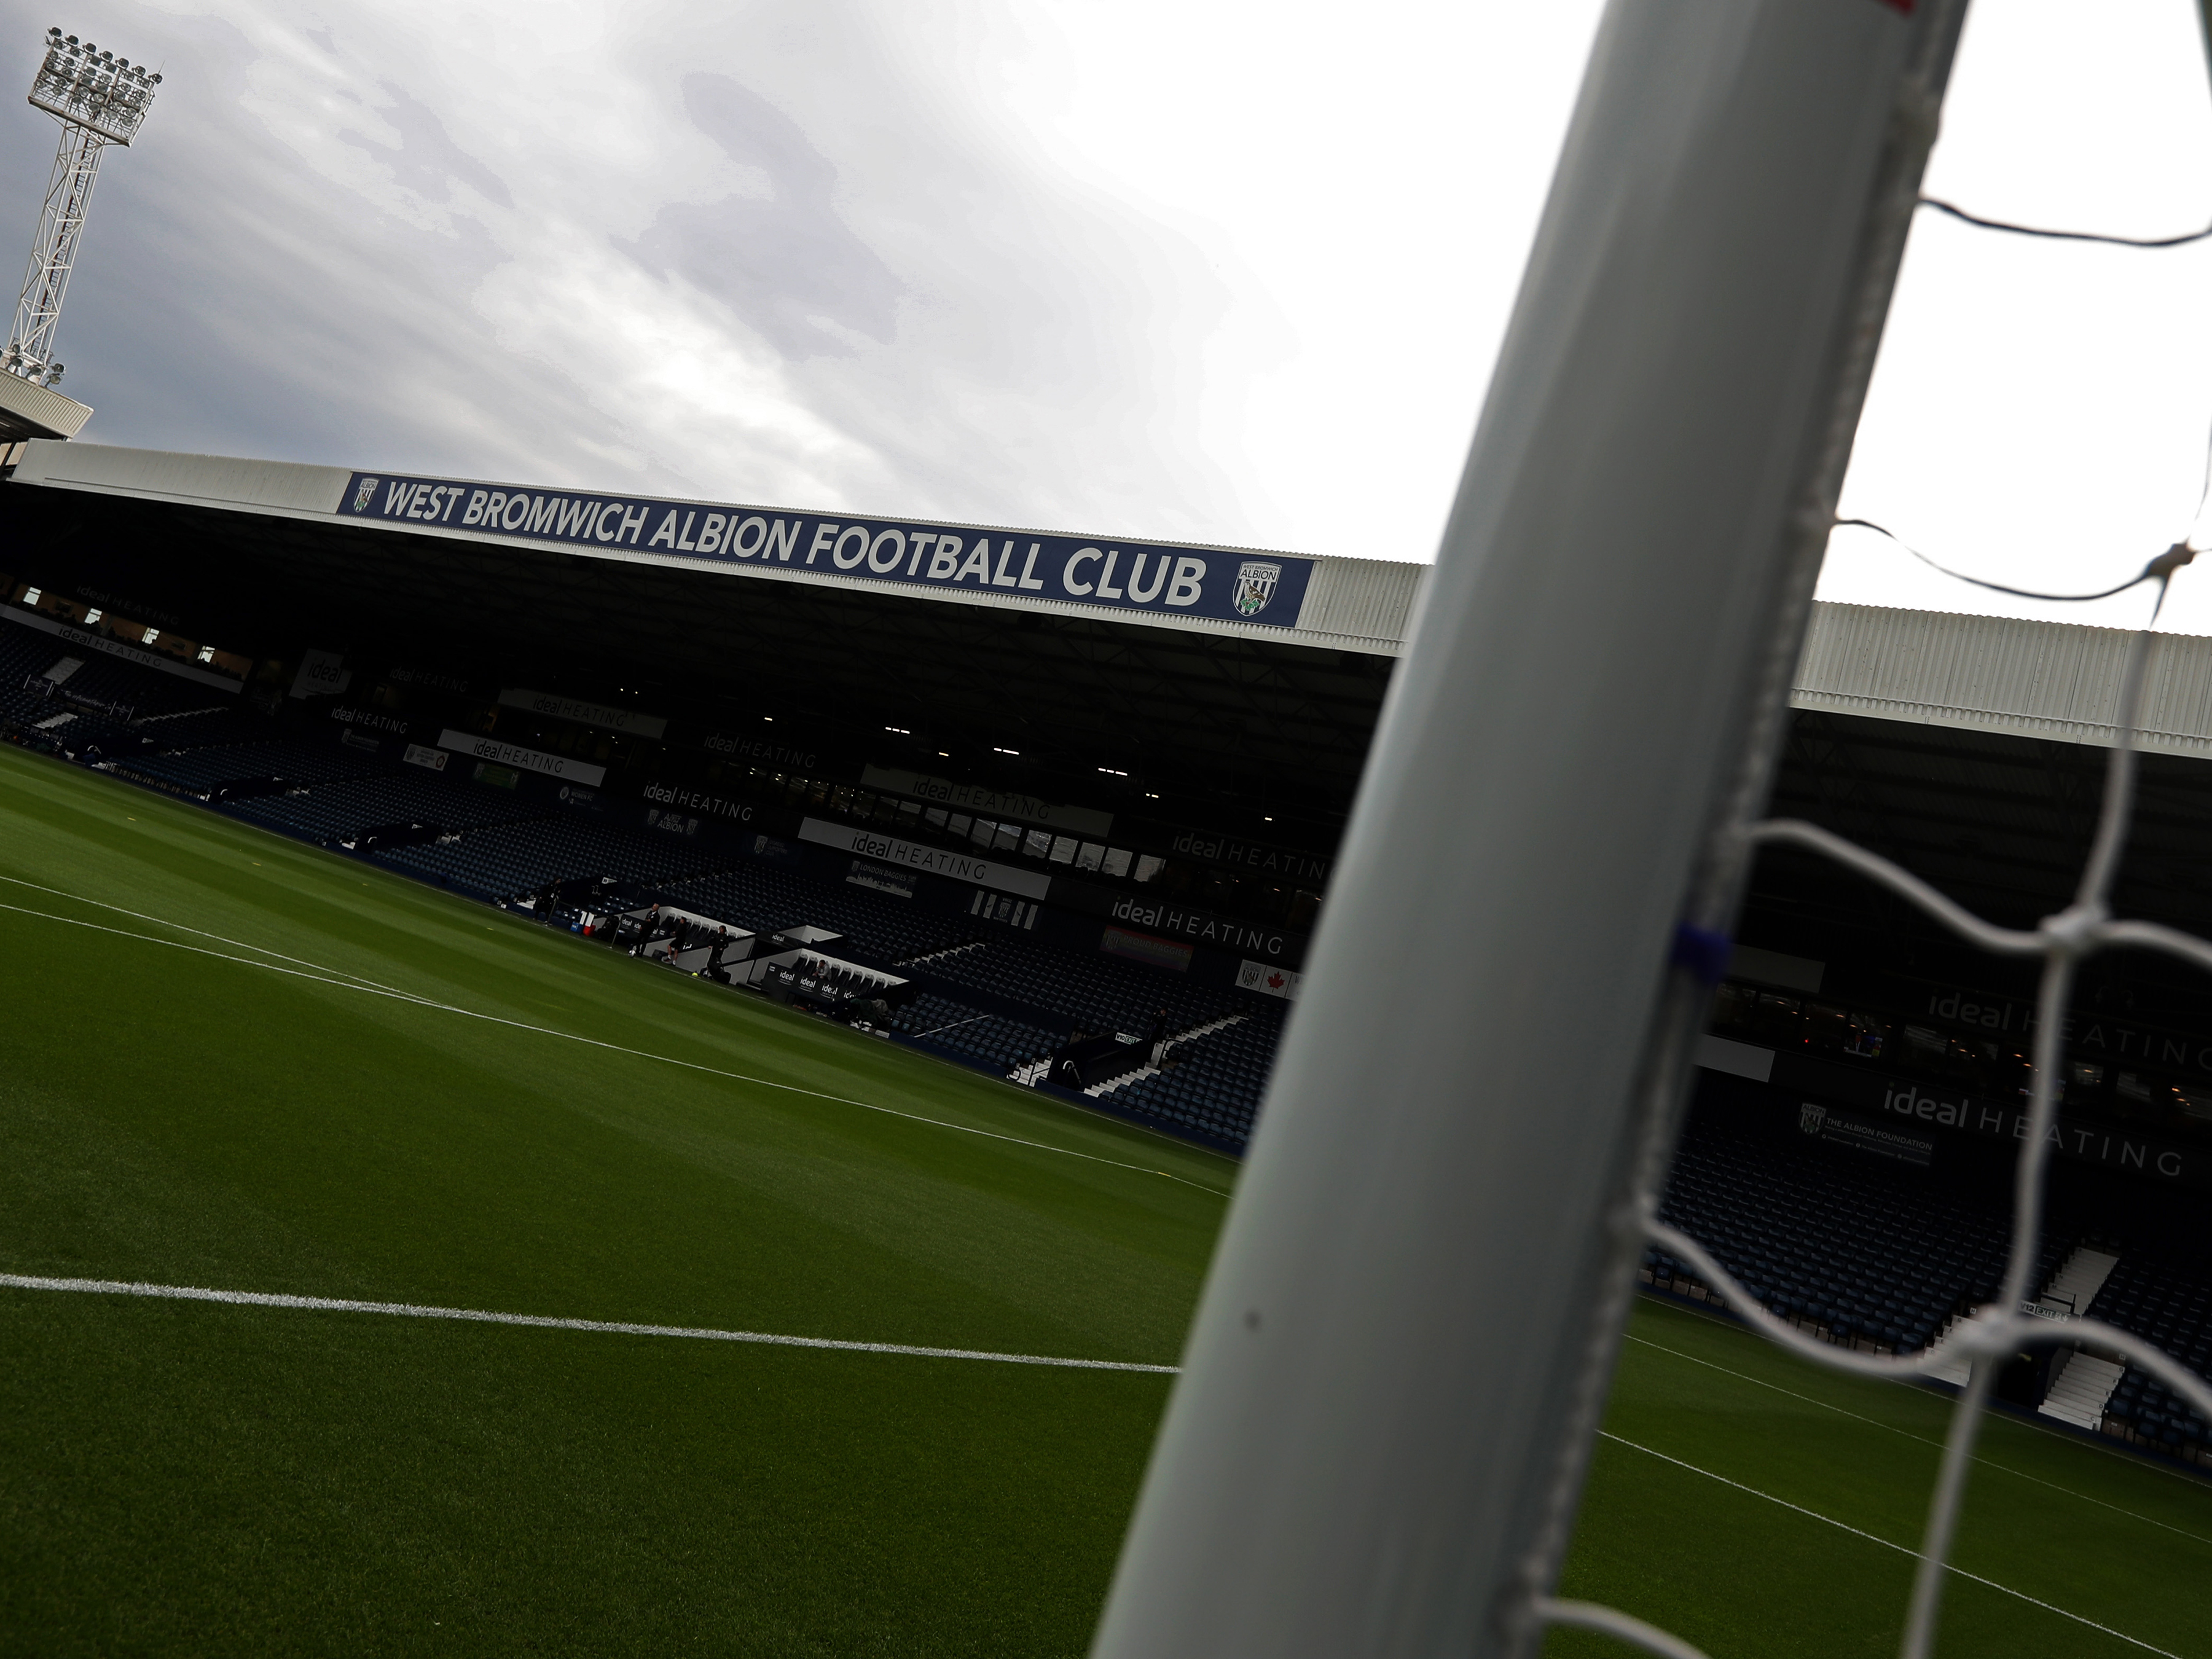 An image of The Hawthorns